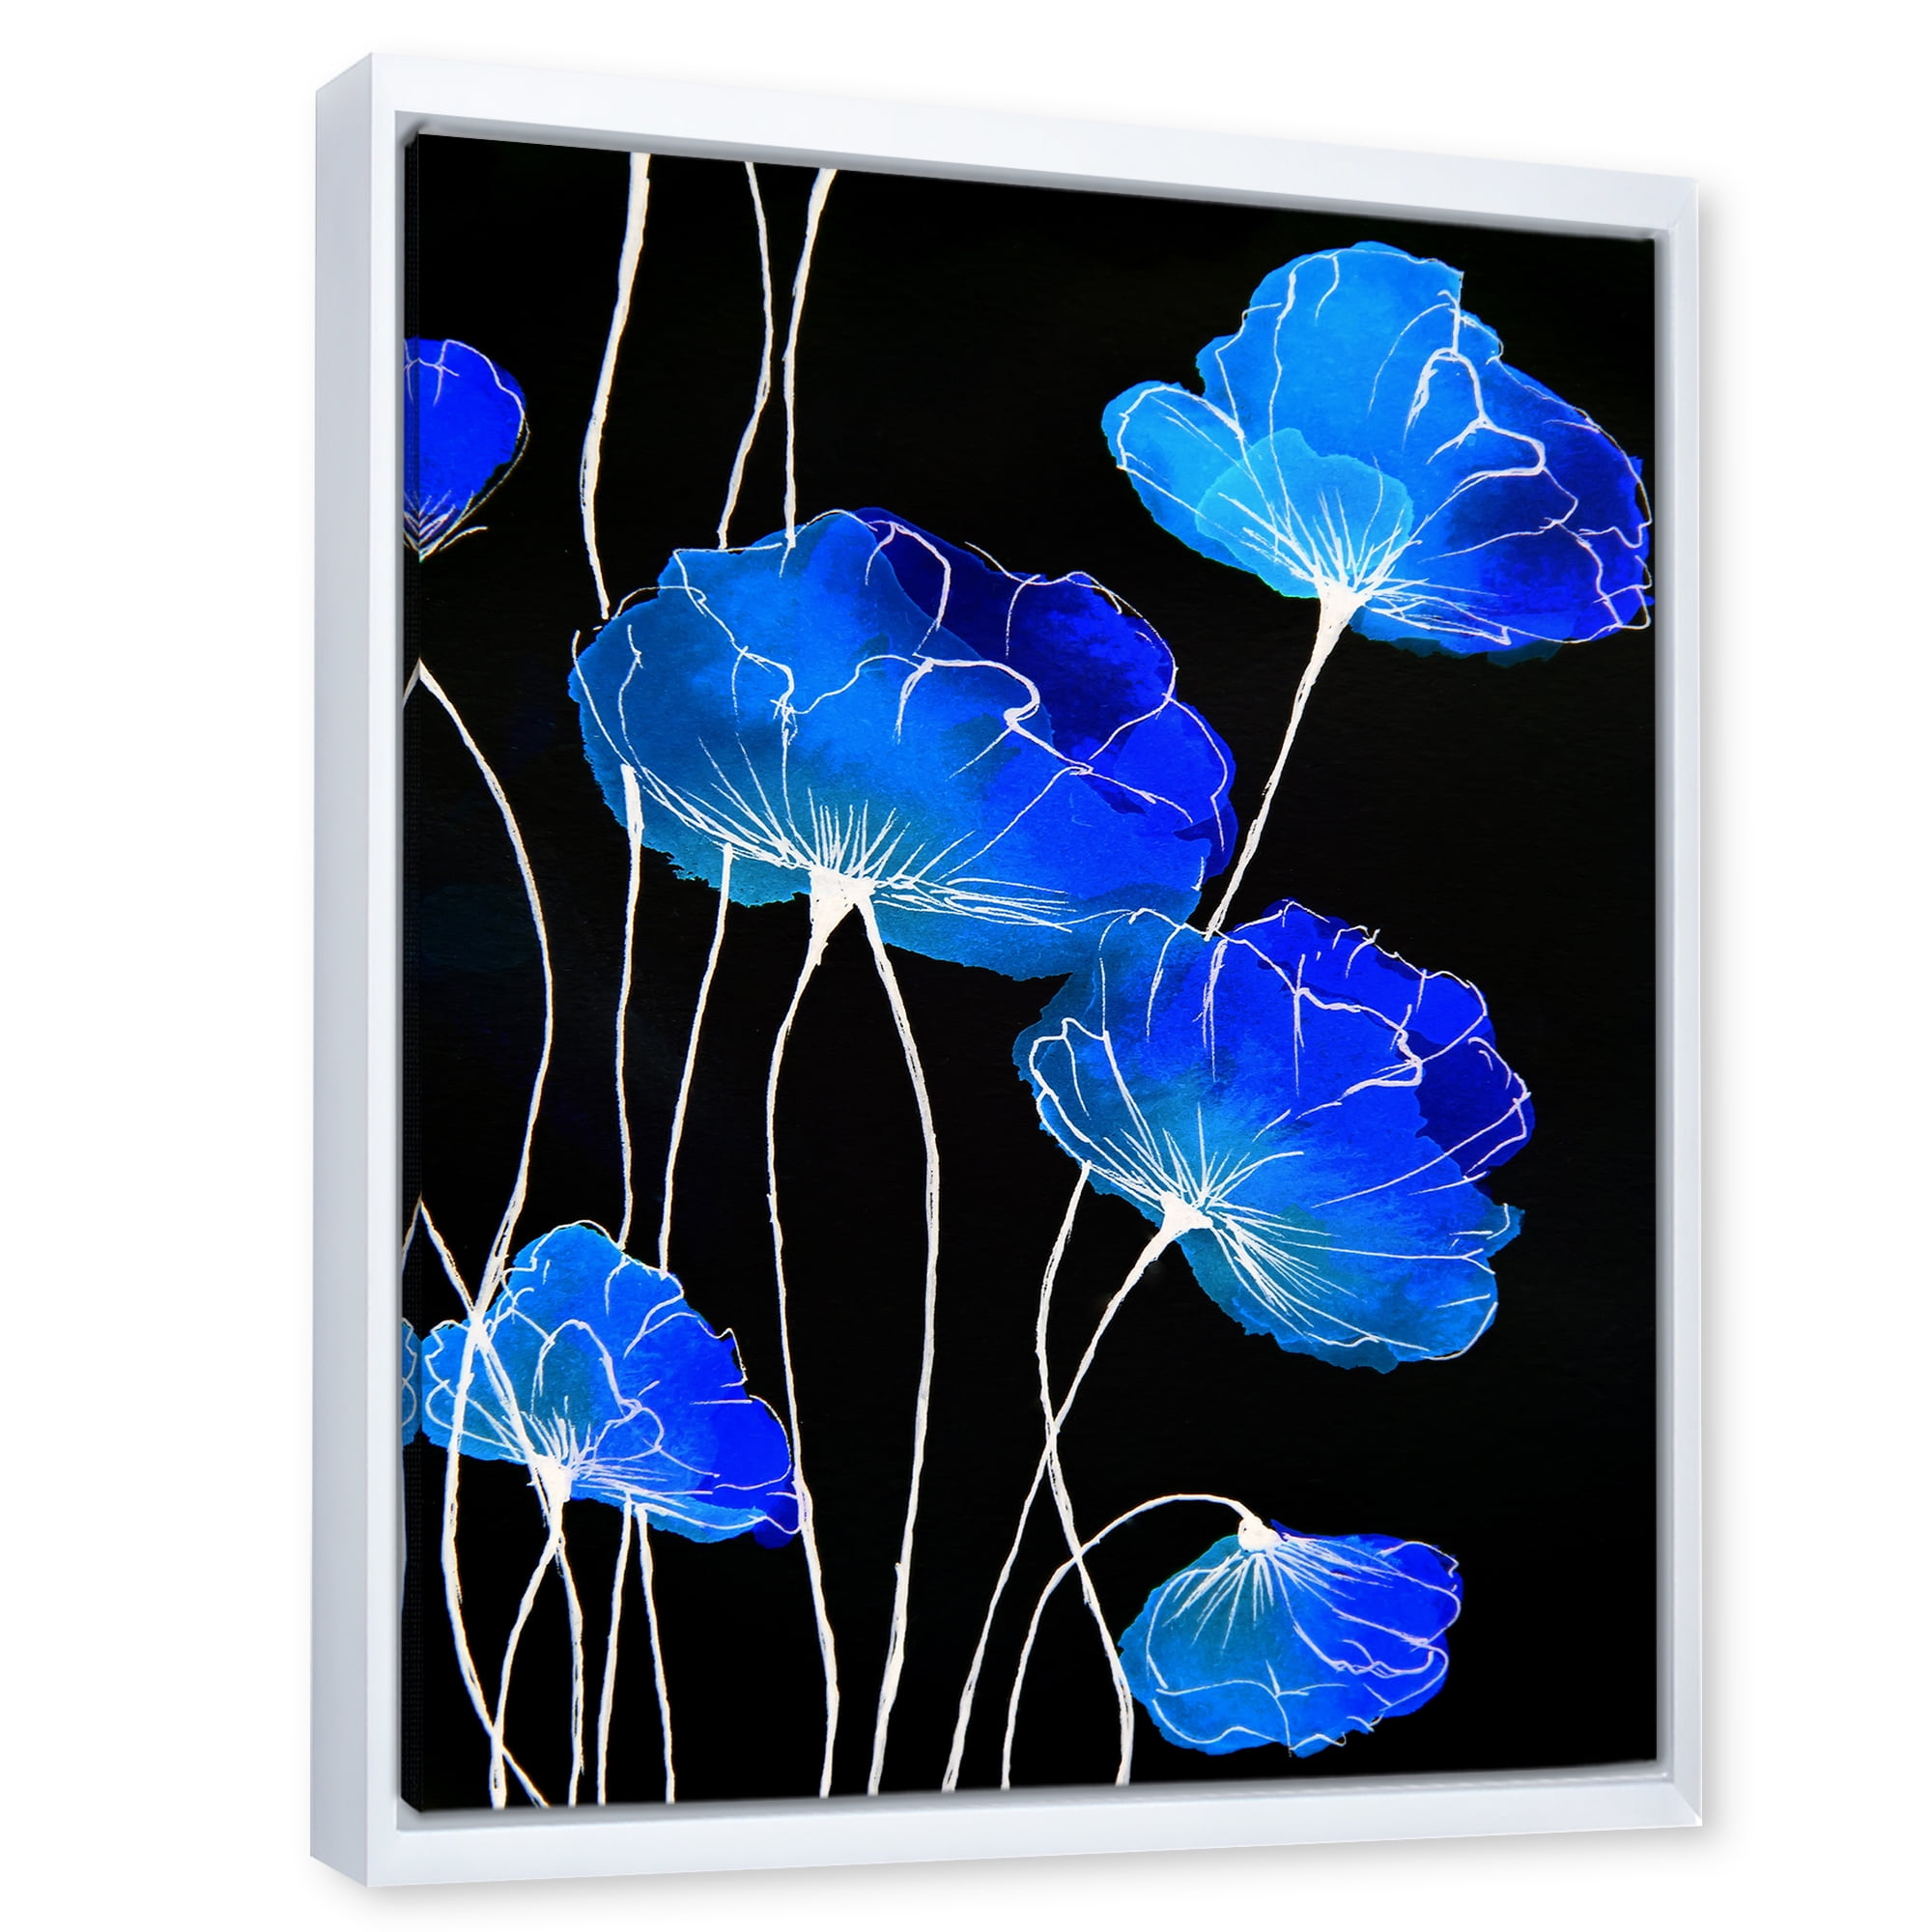 Detail of Blue Flowers On Black Background II 24 in x 32 in Framed Painting  Canvas Art Print, by Designart 